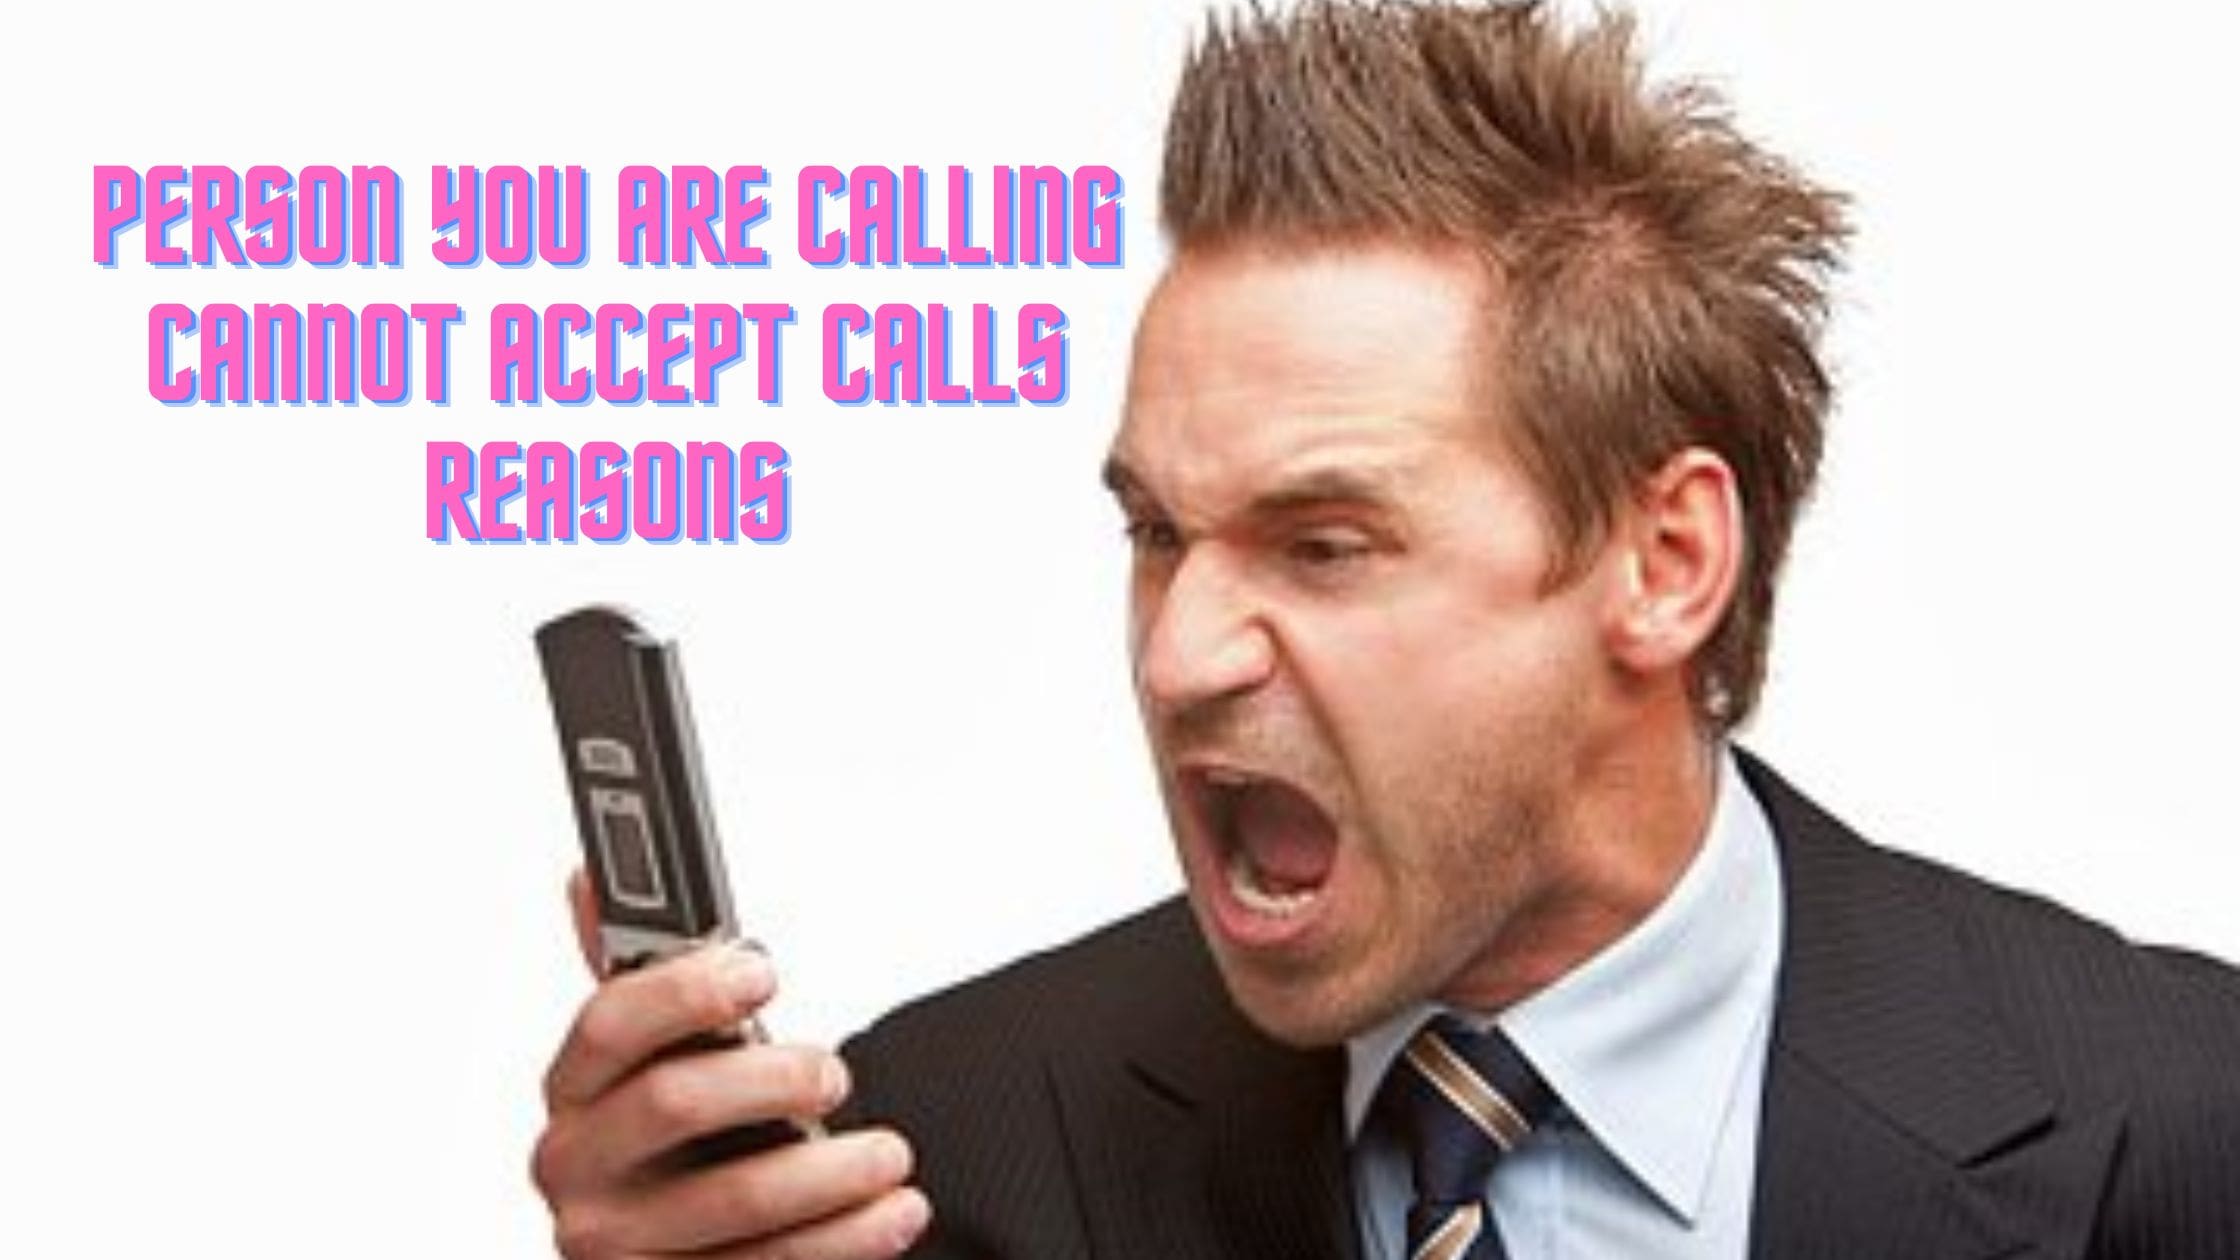 the person you are calling cannot accept calls at this time